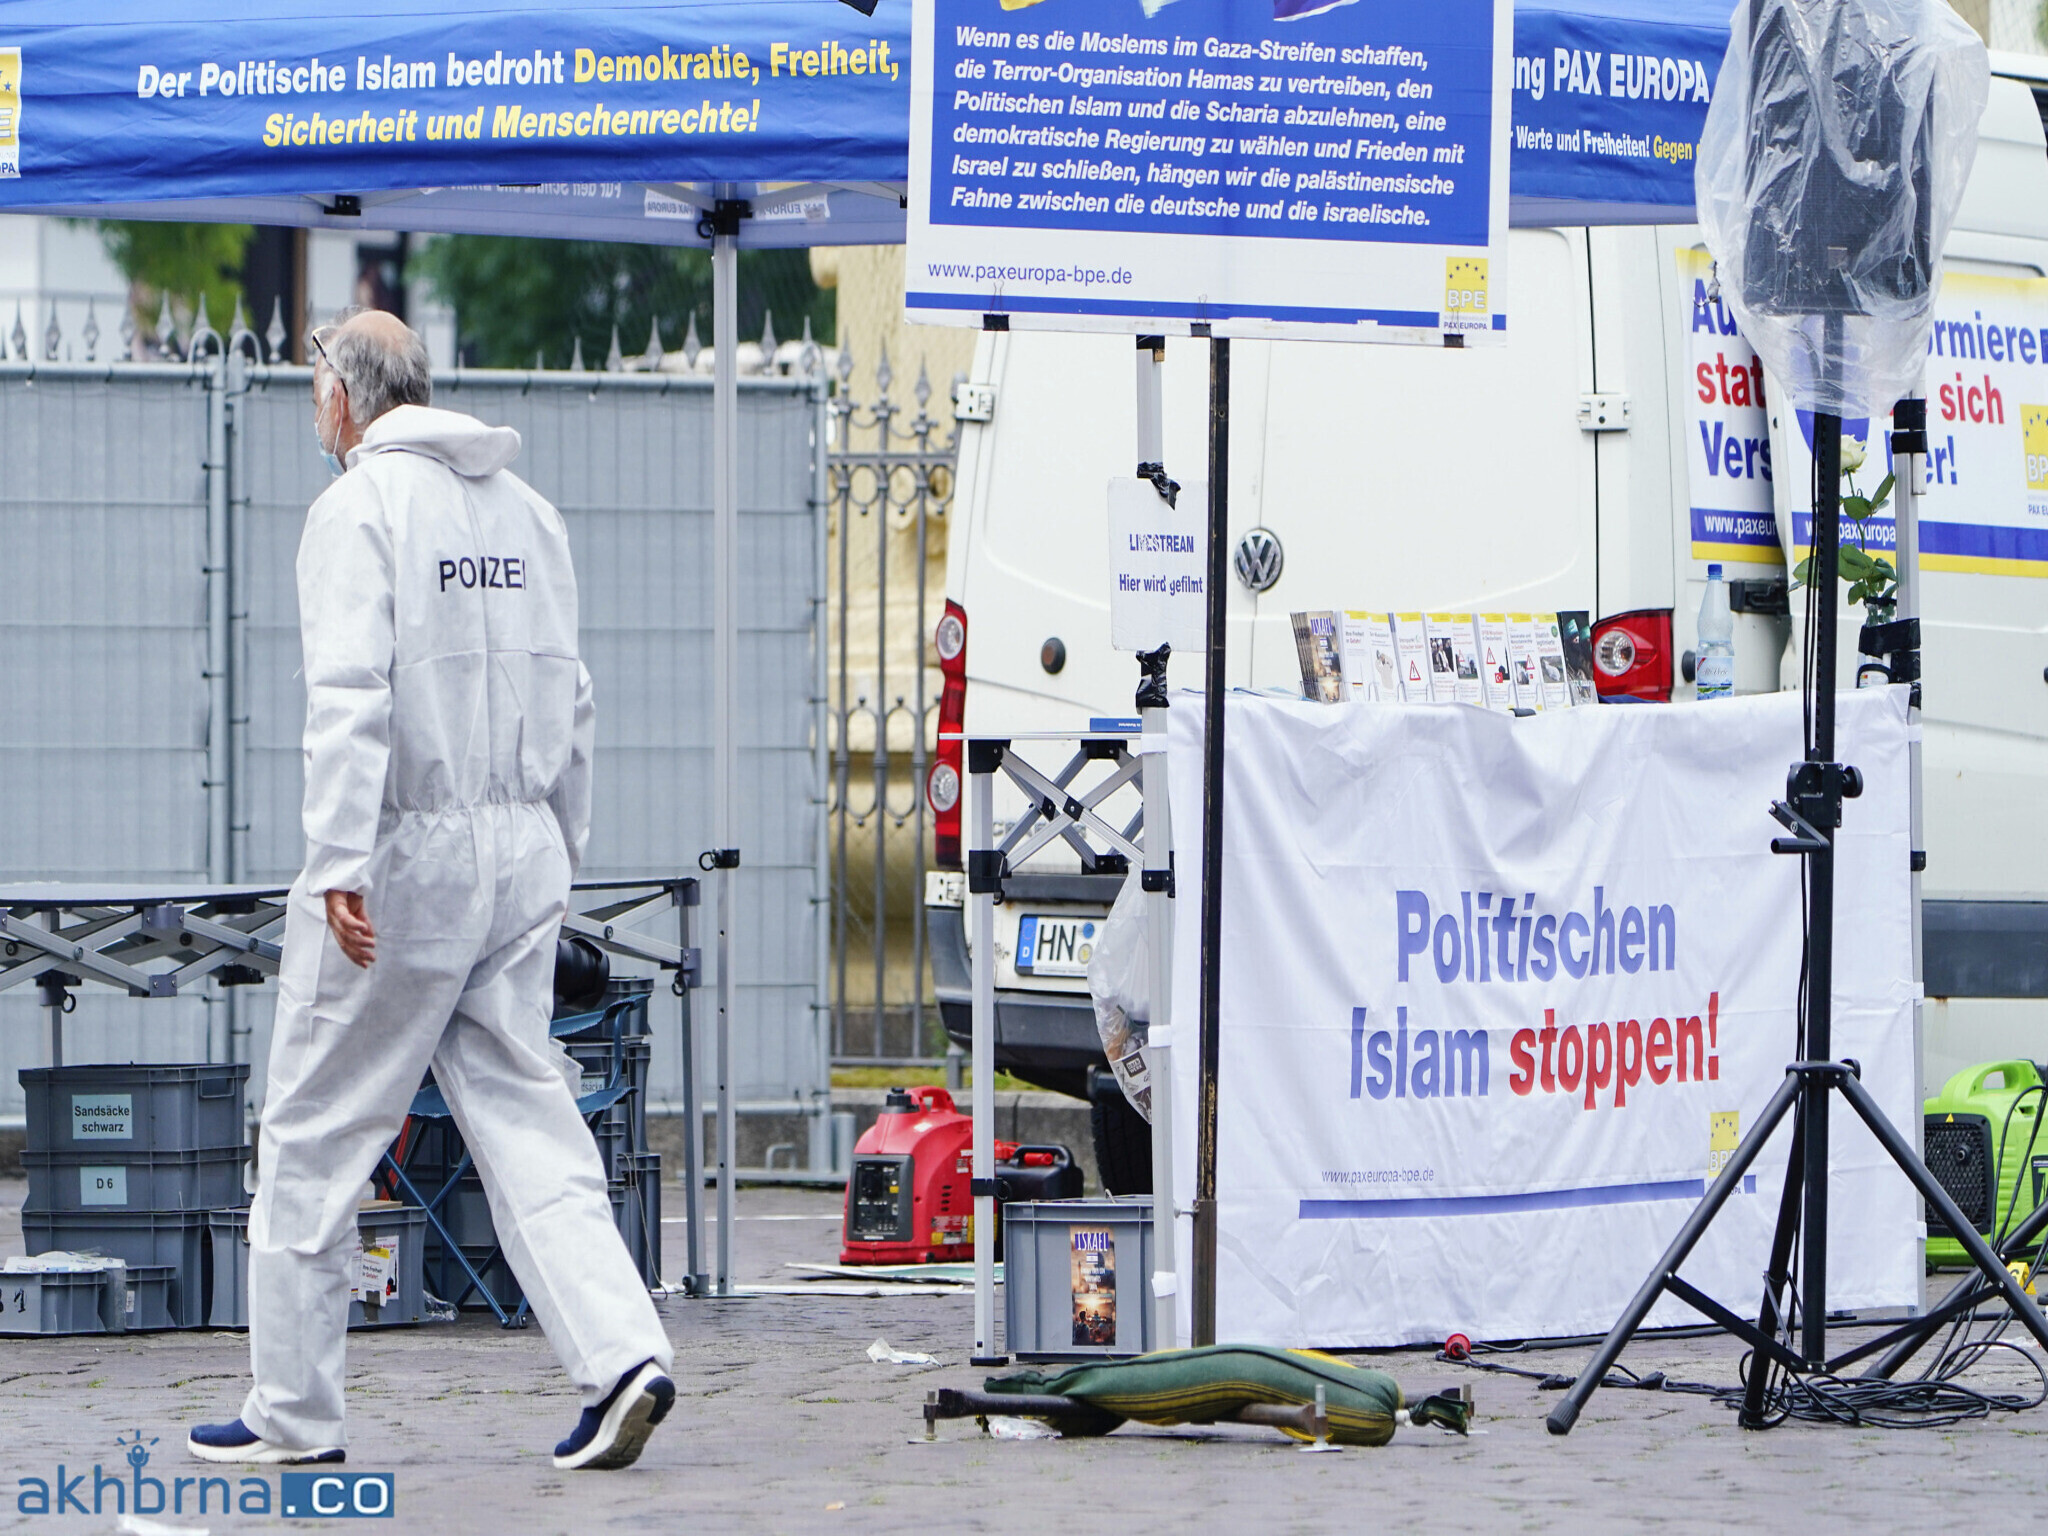 Germany: Multiple injured in horrific knife assault in distressing incident